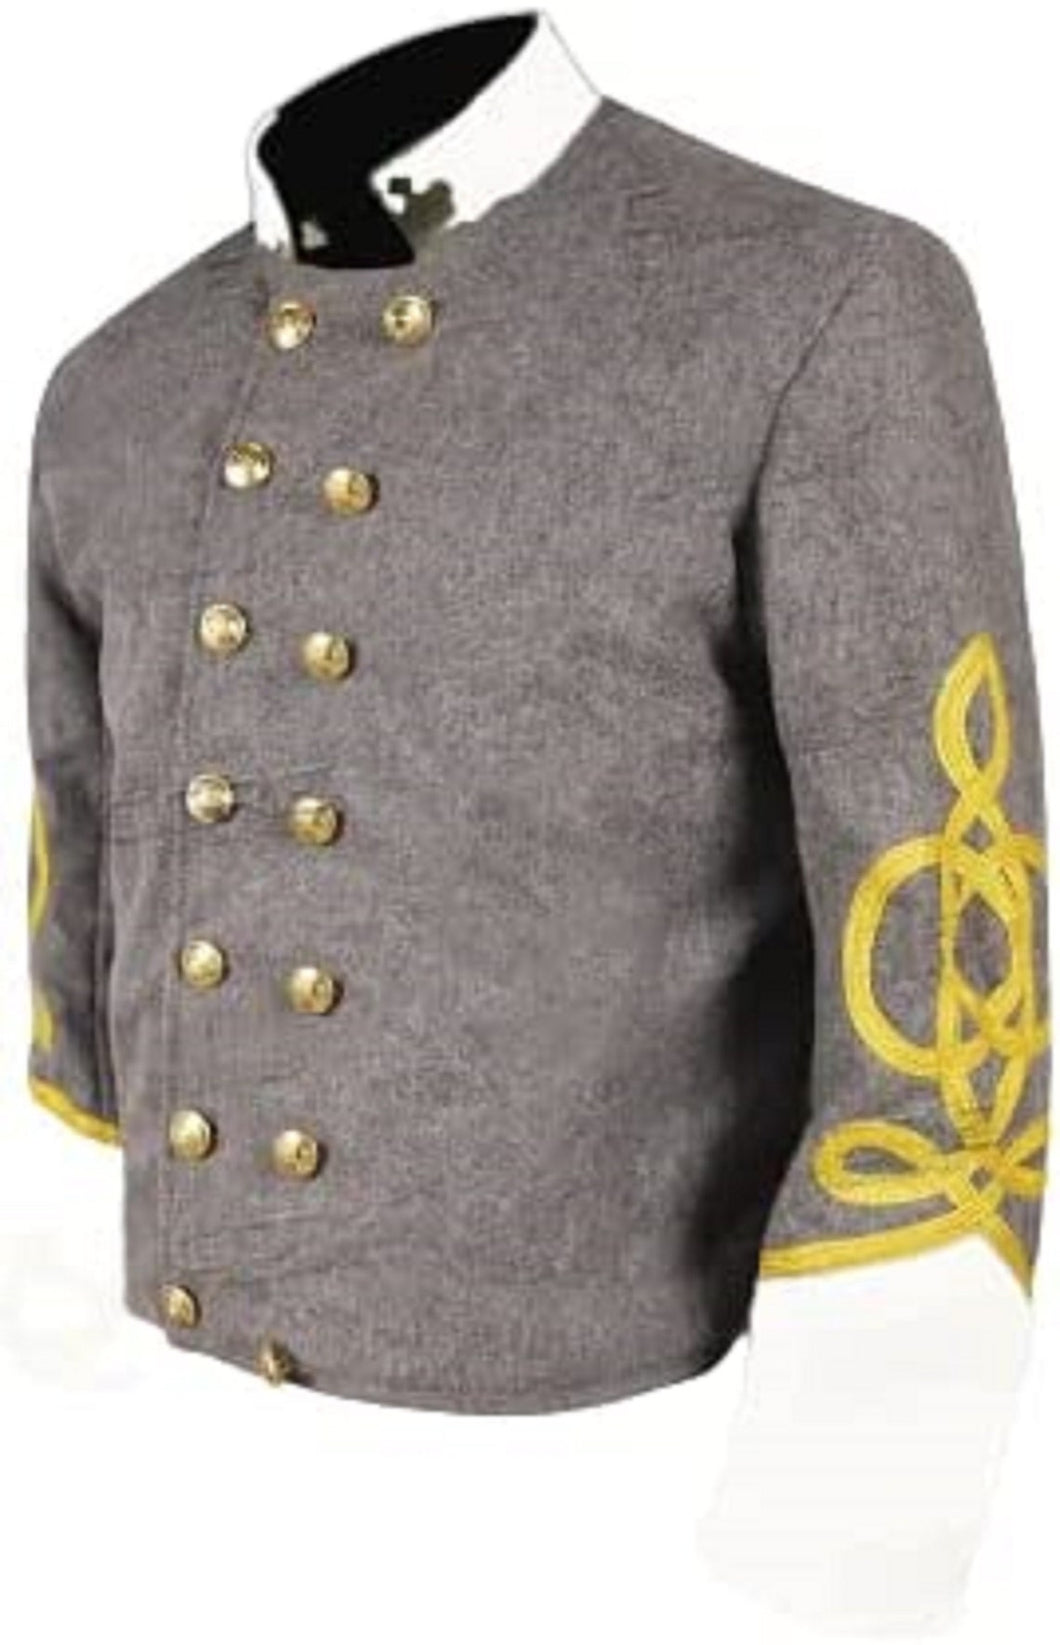 Civil war American Confederate Generals Shell jacket,with Off white collar cuff!